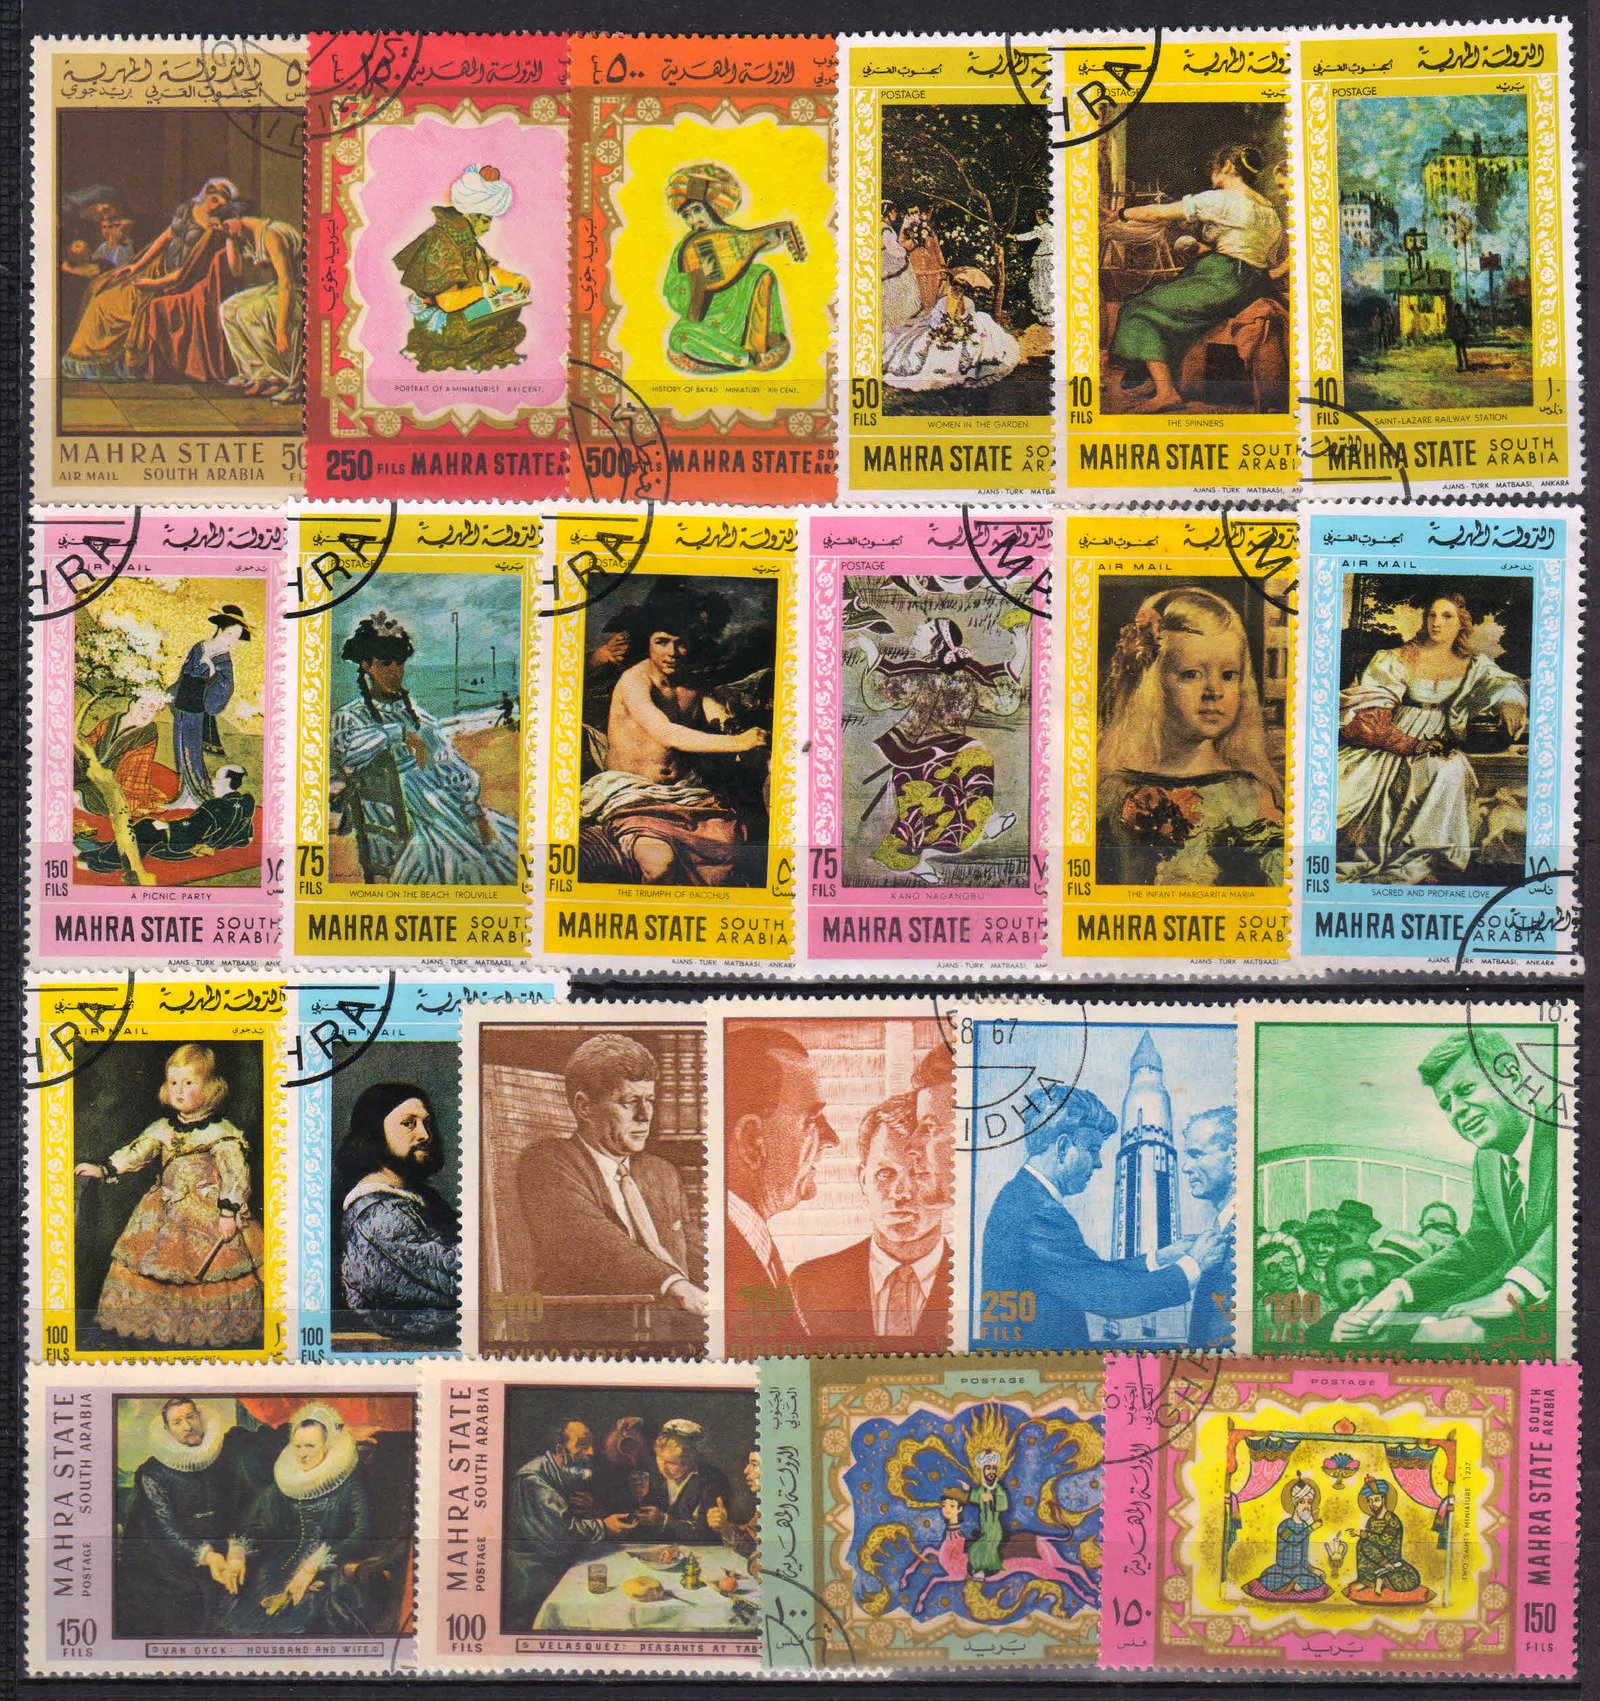 MAHRA STATE (Now Part of Yemen), 22 Different Thematic Stamps, Large & Cancelled Stamps